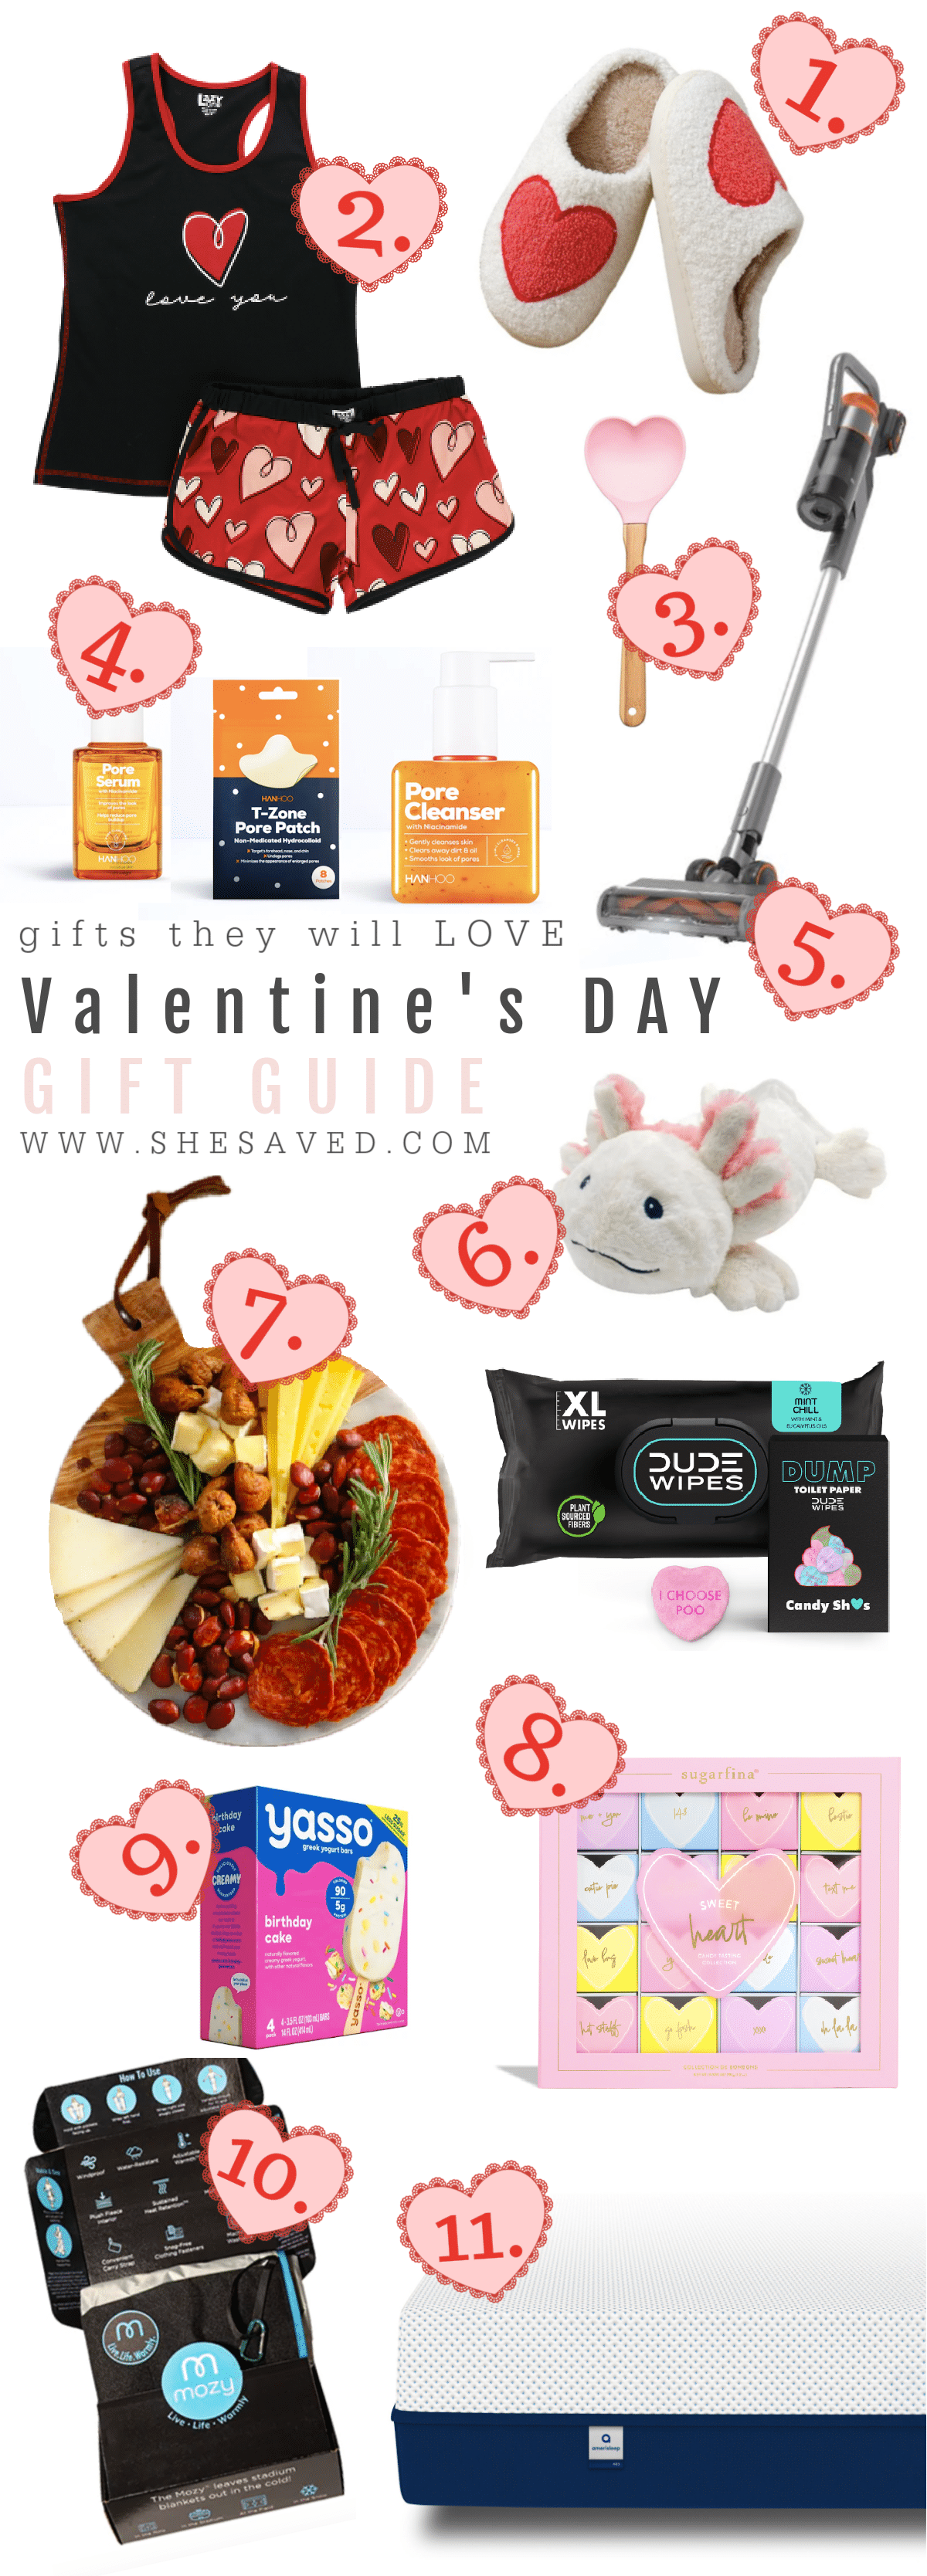 A huge selection of Valentine's Day gift ideas including vacuum, dude wipes, appyhour, mozy blanket, yasso and more!